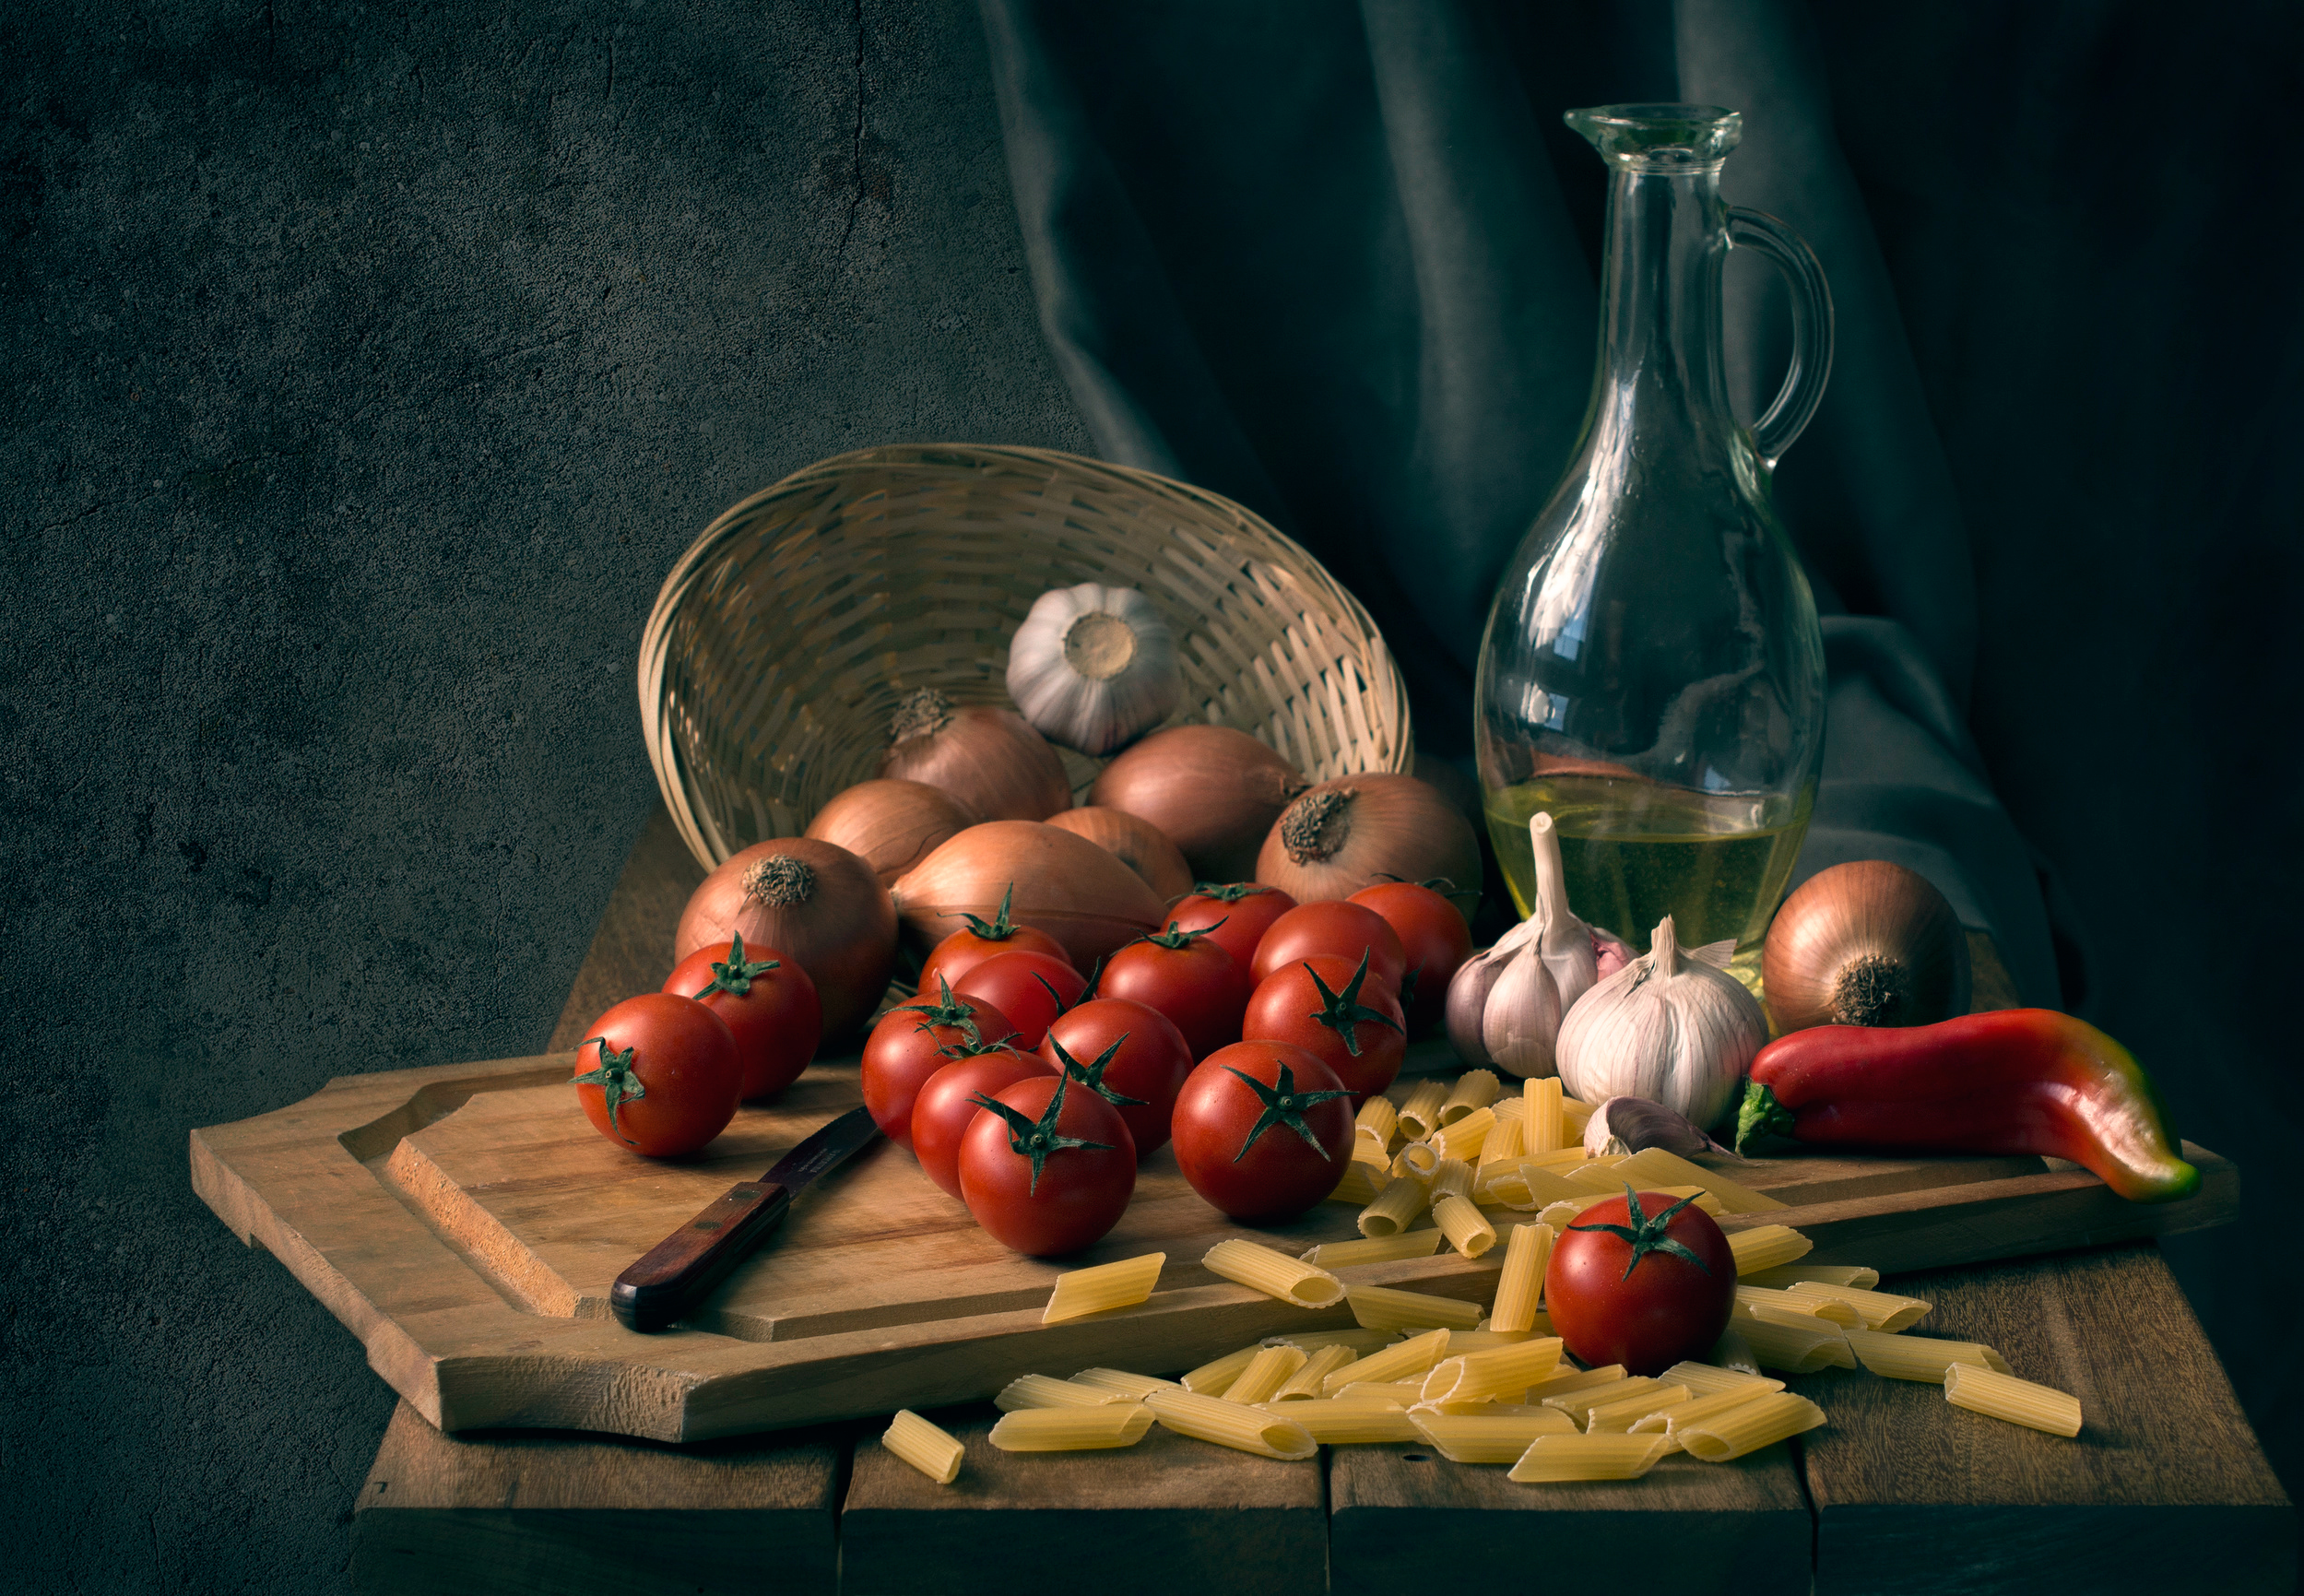 Food Noodles Tomatoes Vegetables Still Life Pasta Garlic Onions Red Pepper Olive Oil Jar Knife Cutti 2499x1731